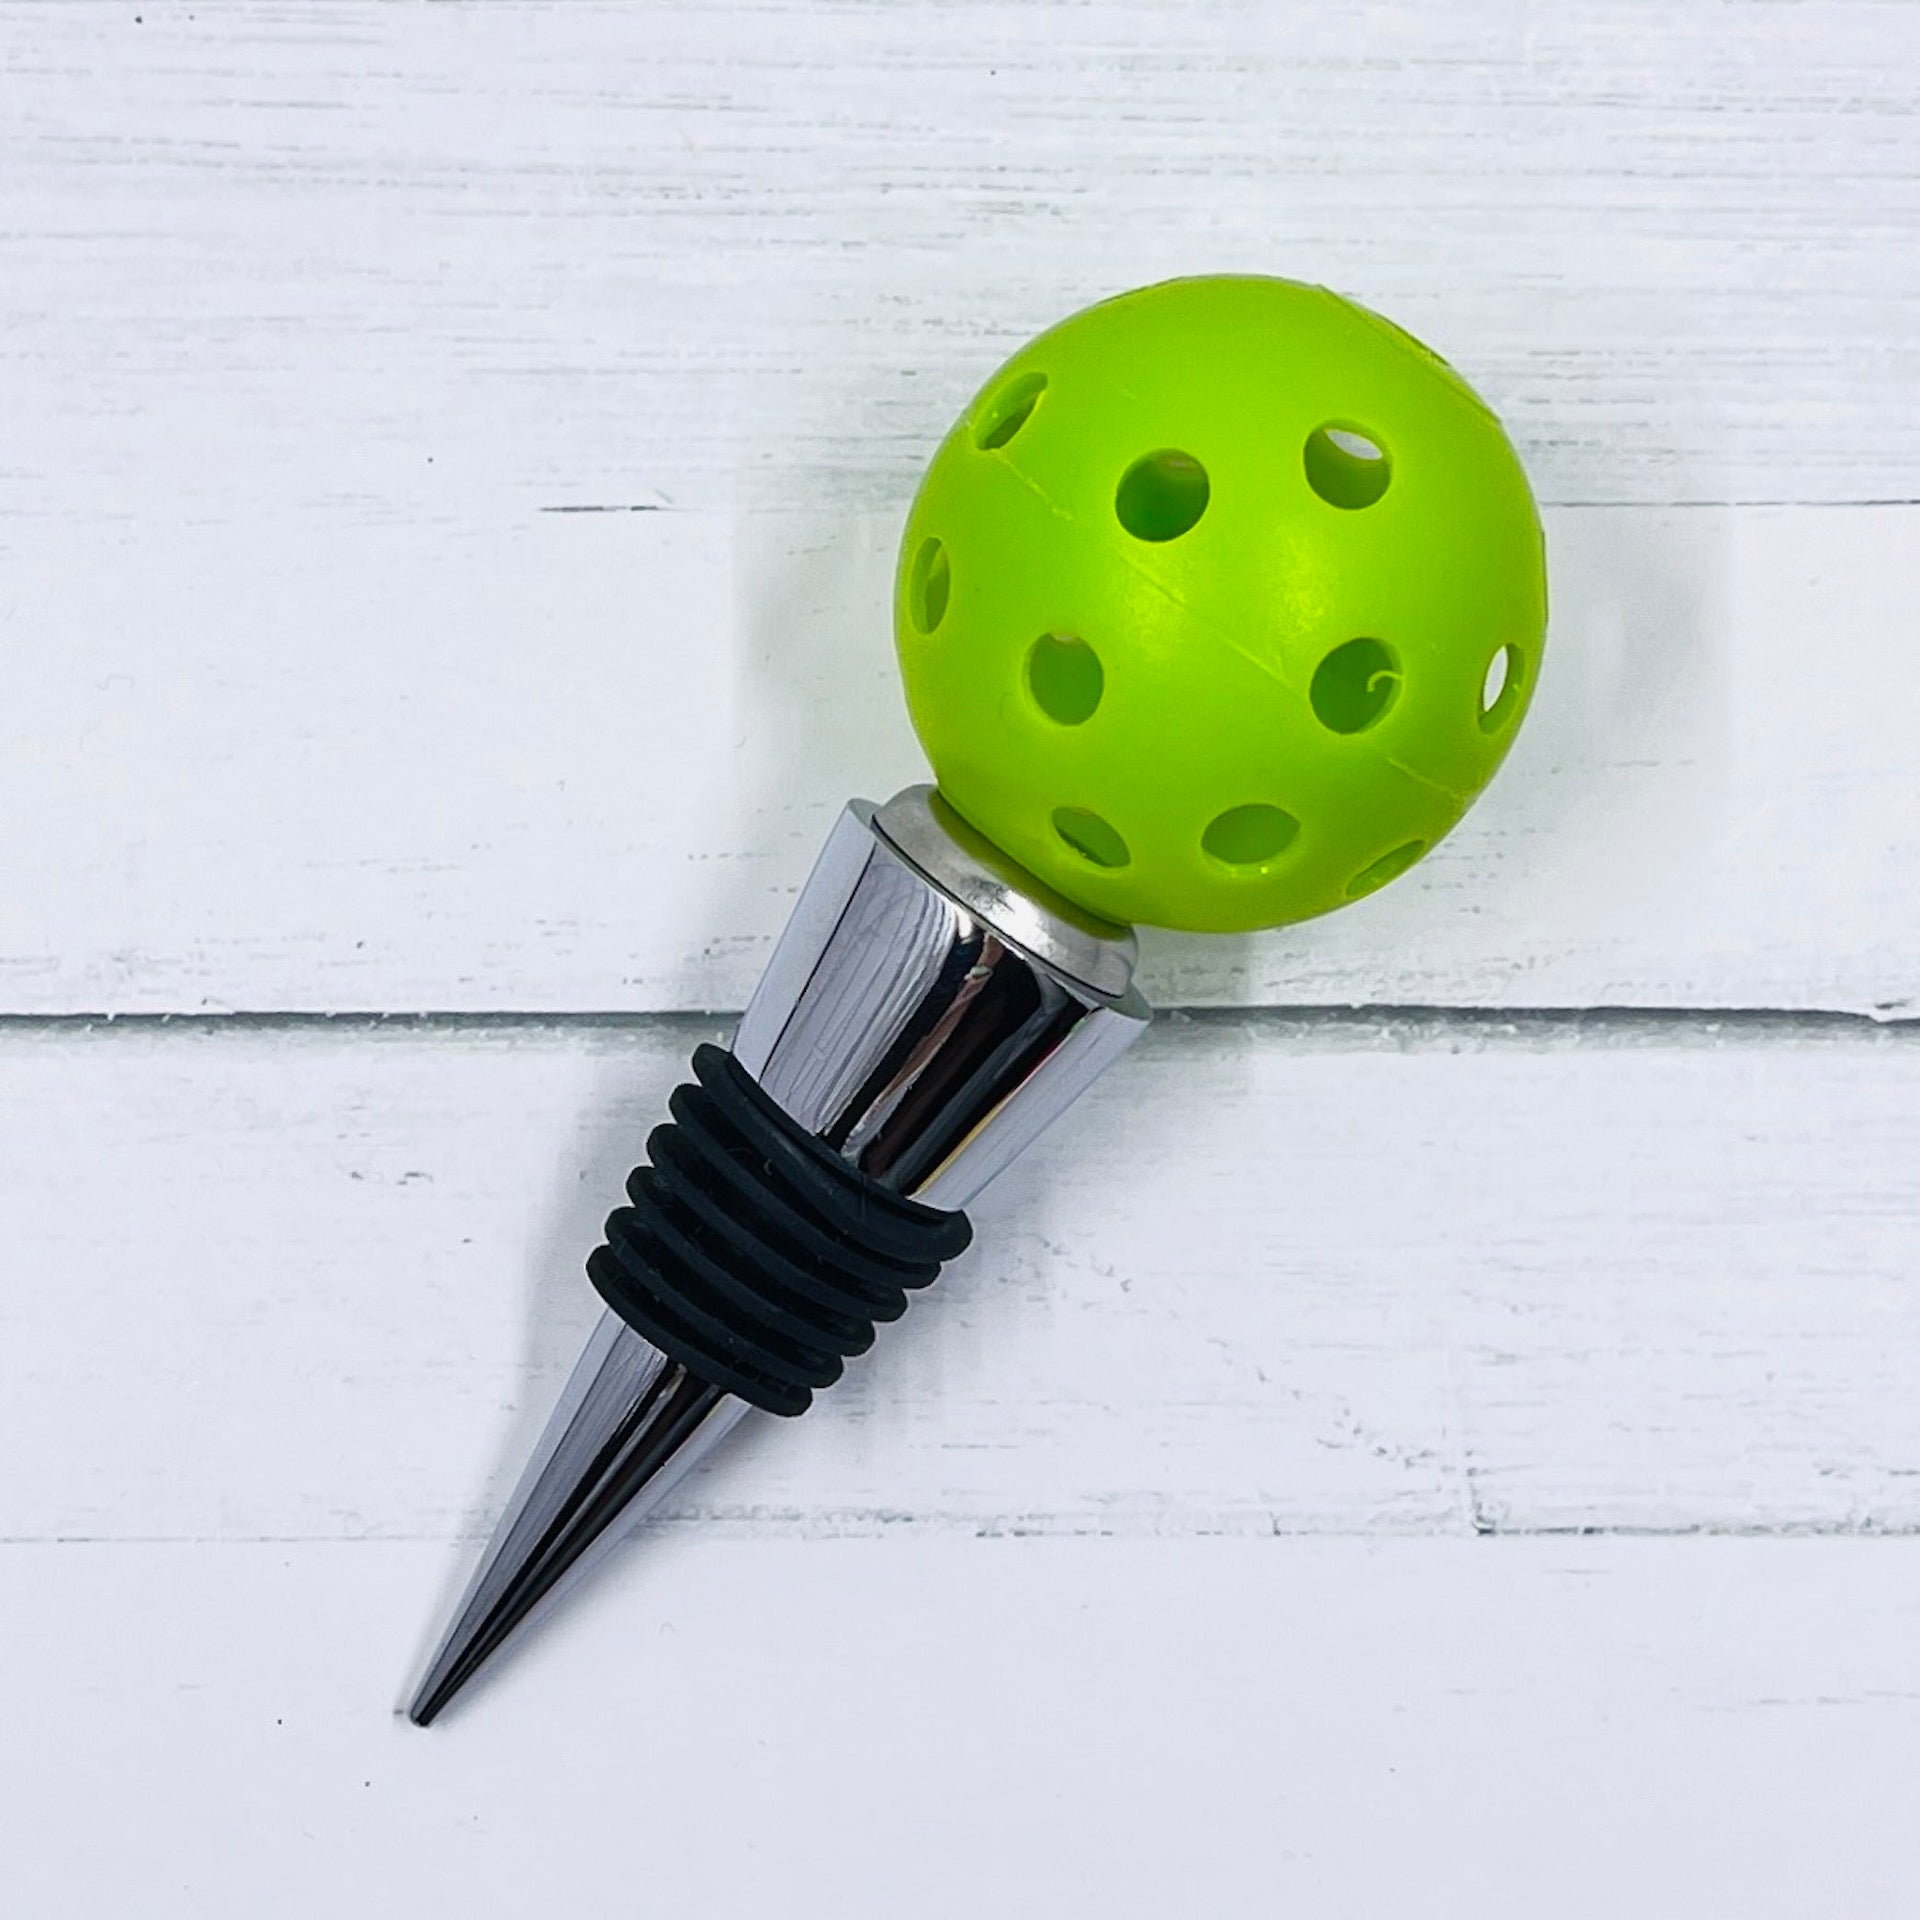 Pickleball Wine Bottle Stopper - Well-Made and Very Sturdy - Perfect Gift  These sturdy well-made wonderful pickleball wine bottle stoppers are the perfect gift for all your like-minded friends or splurge and treat yourself - YOU DESERVE IT! Each order contains one wine bottle stopper. You get to choose the color. 